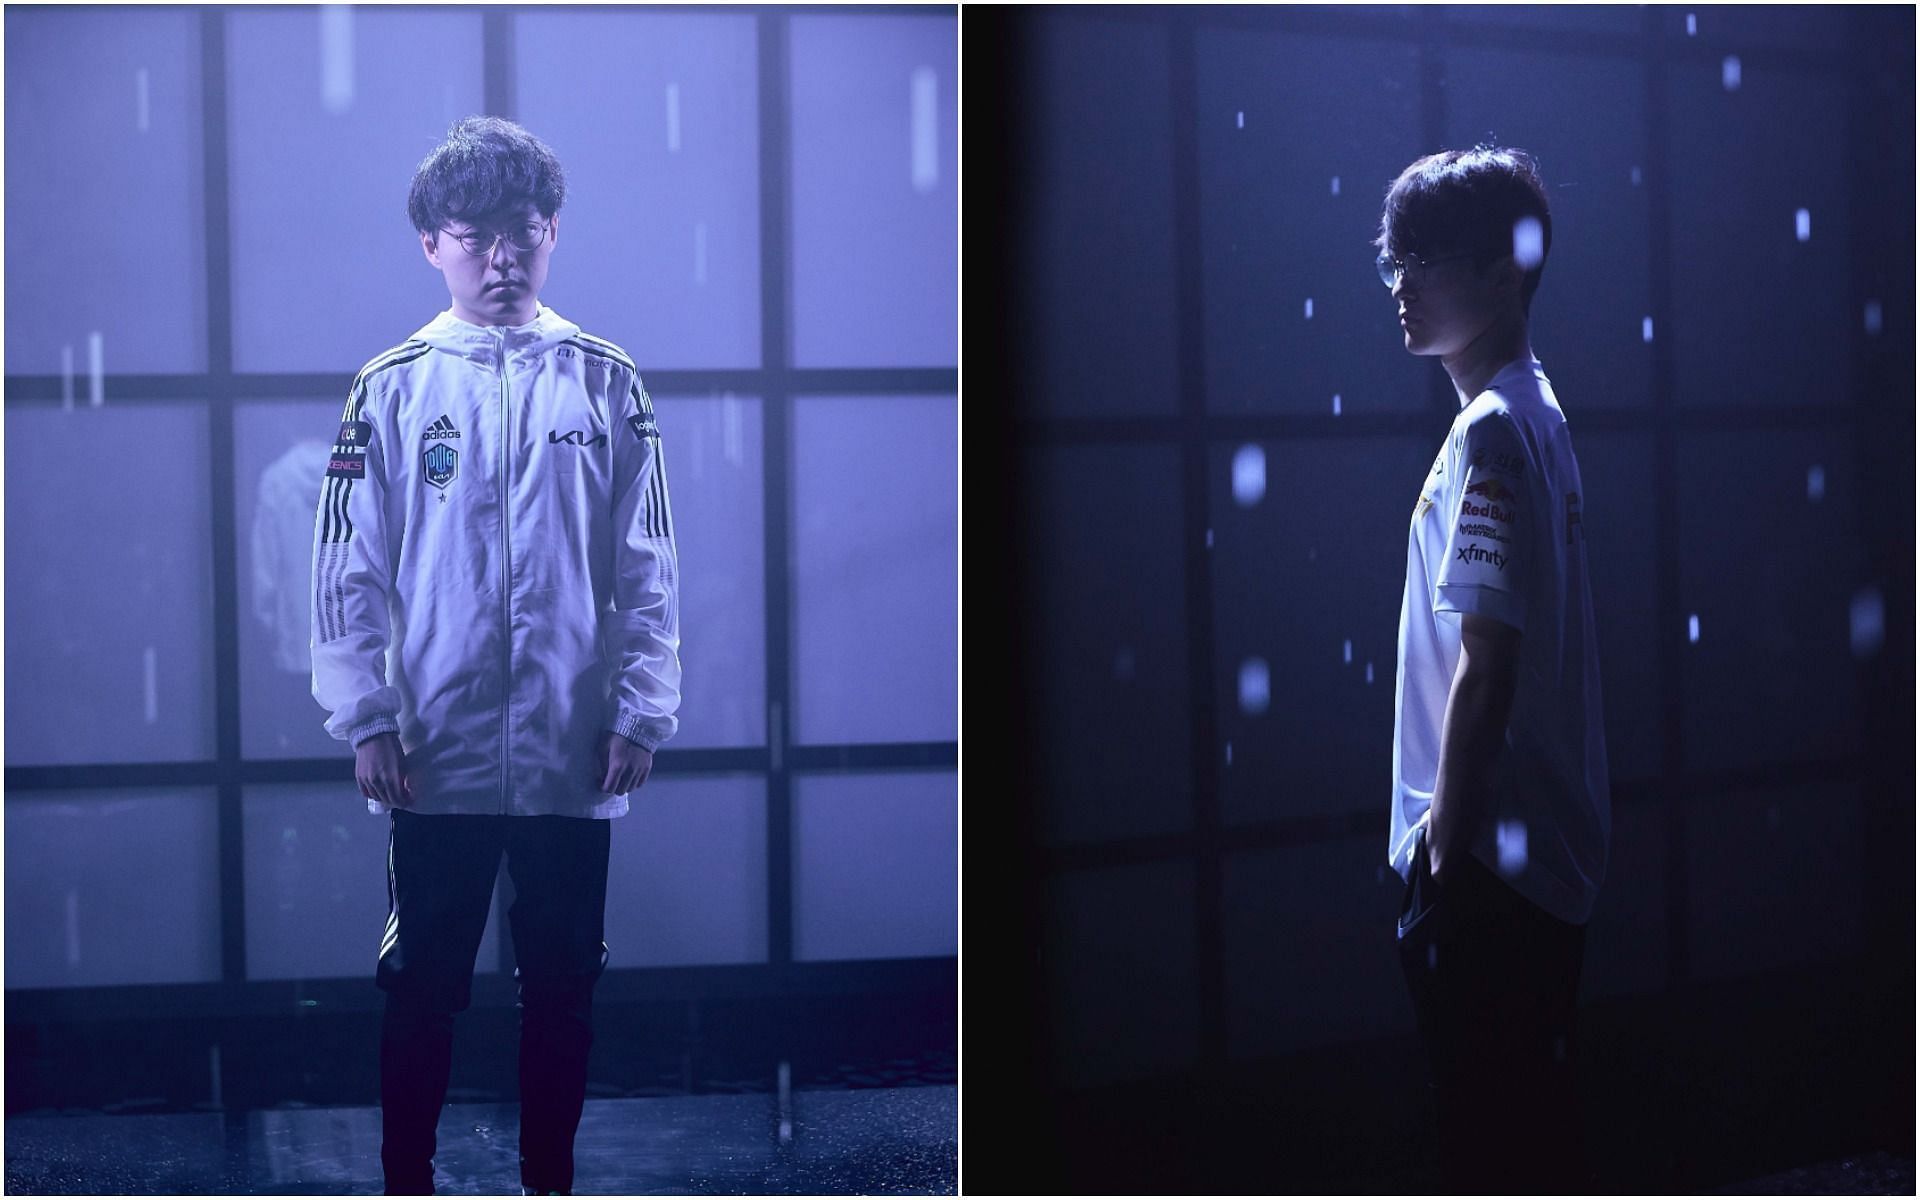 Faker vs ShowMaker is set to be the prime matchup (Image via League of Legends)